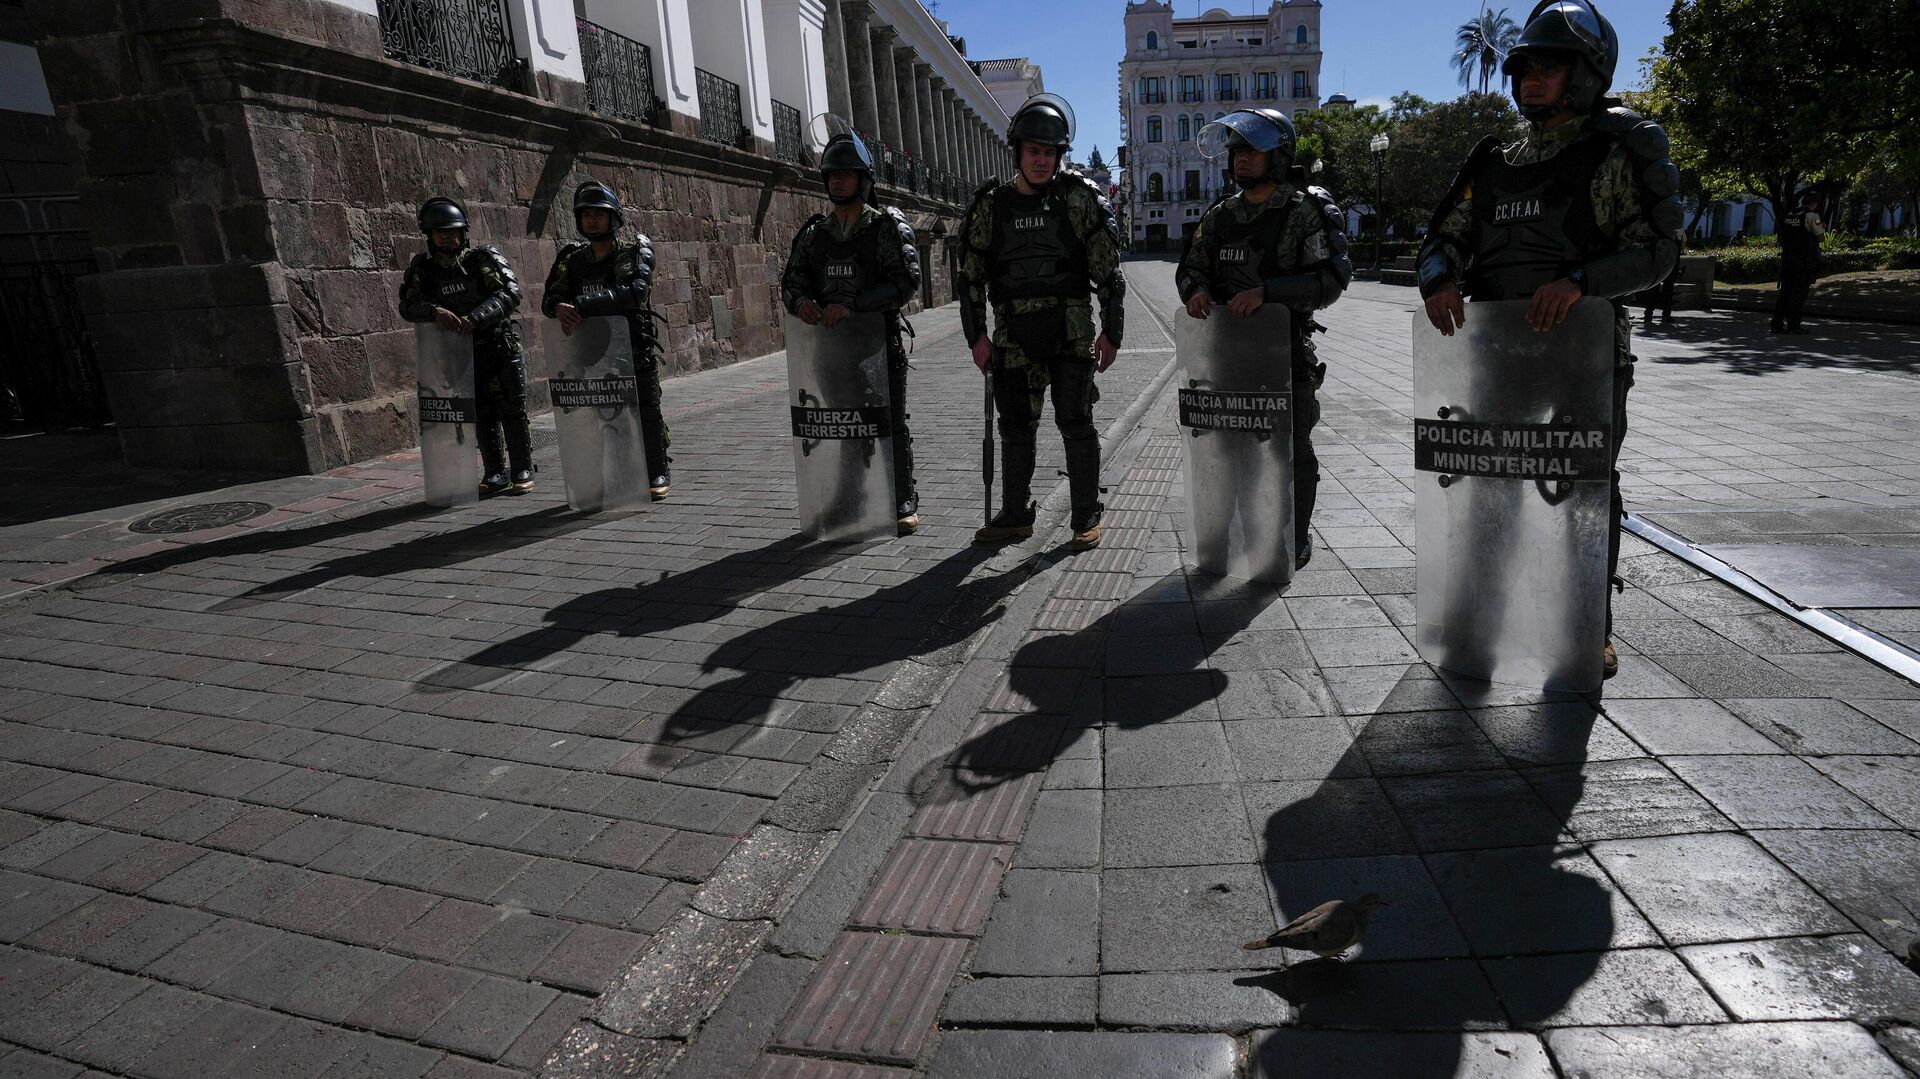 Military police guard the presidential palace in Quito, Ecuador, Thursday, Aug. 10, 2023. President Guillermo Lasso declared a state of emergency, that involves additional military personnel deployed throughout the country, after the assassination of presidential candidate Fernando Villavicencio at a campaign rally in Quito. - Sputnik Africa, 1920, 27.08.2023